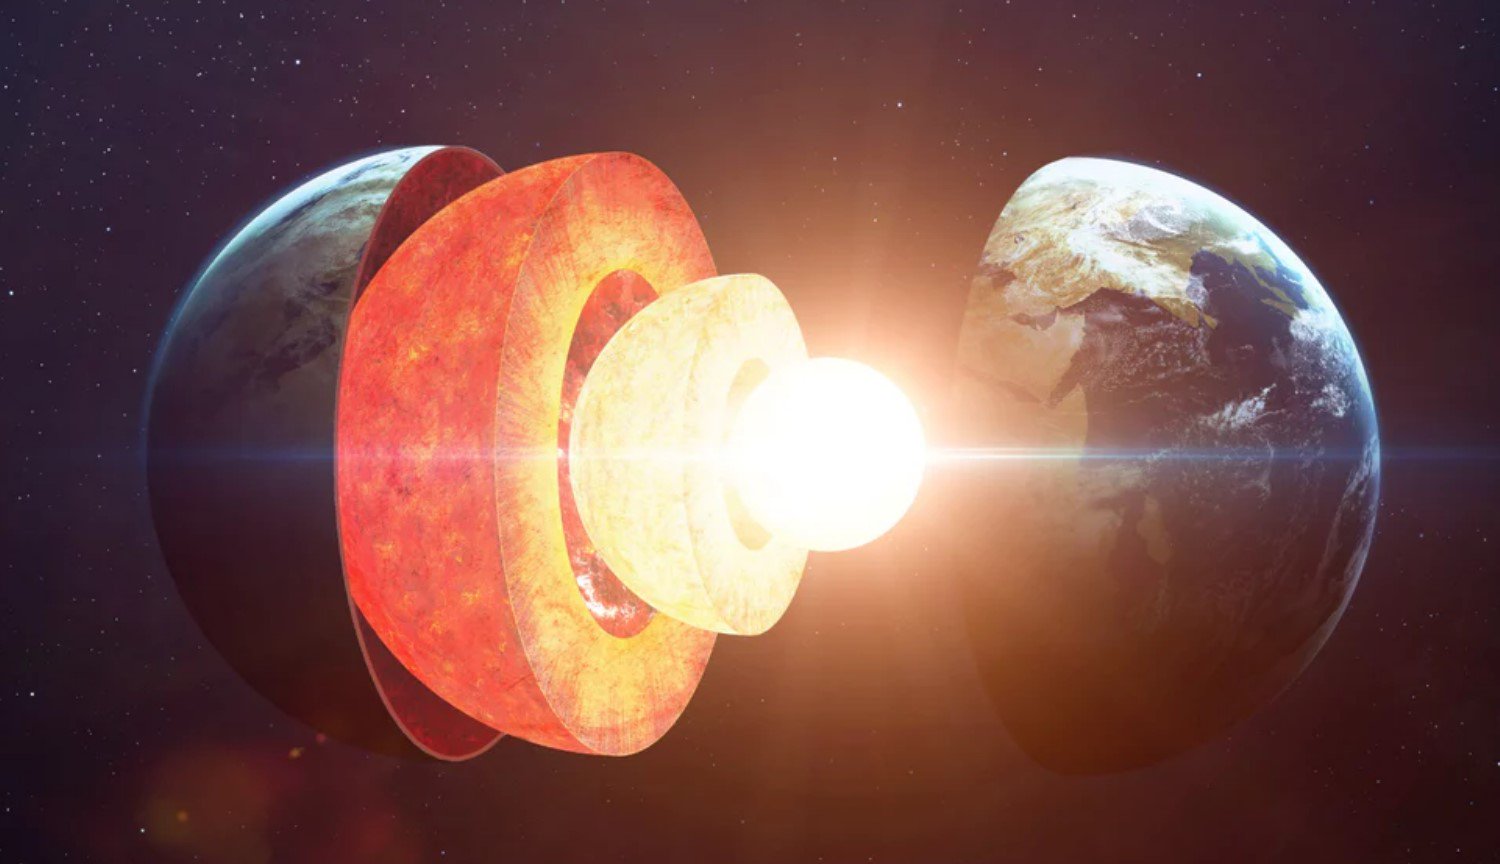 A critical moment in the evolution of the Earth: the planet's core is much younger than her